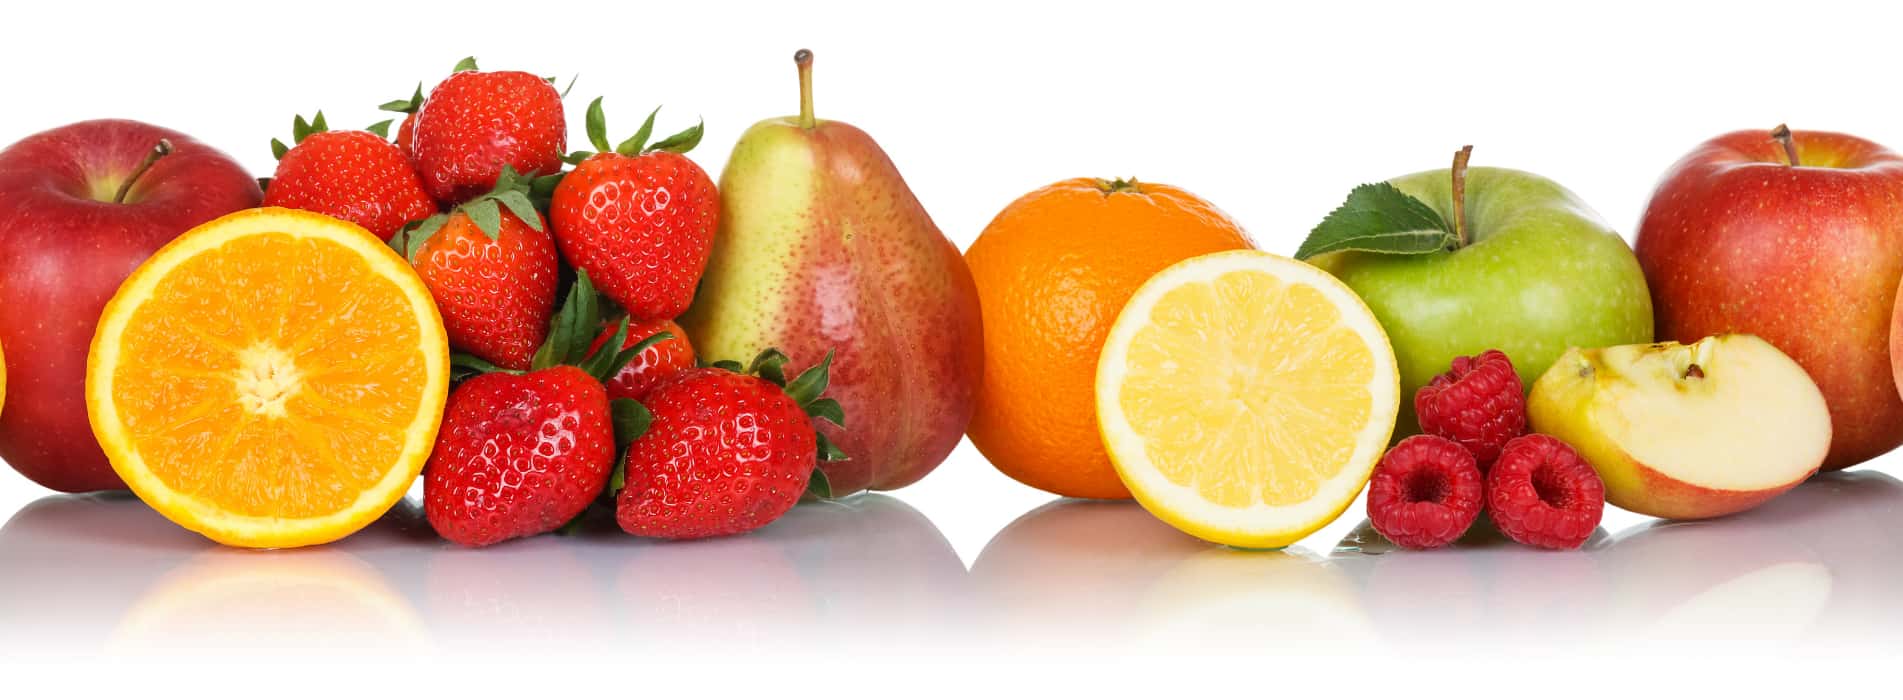 It is Good to Eat a Lot of Fruit to Lose Weight?